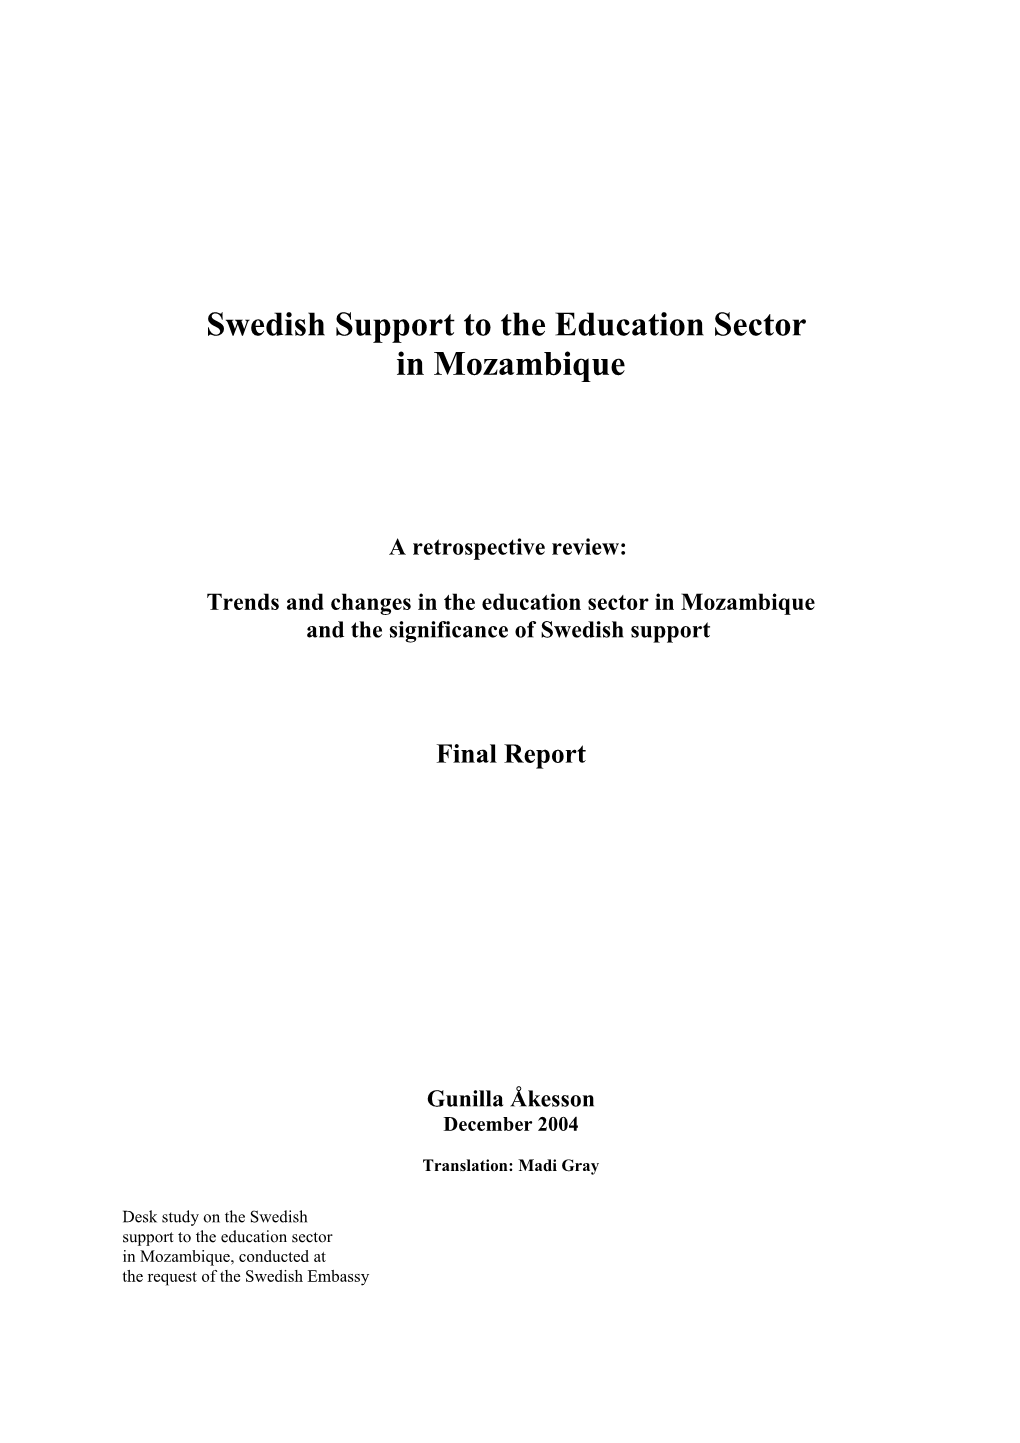 Swedish Support to the Educational Sector in Mozambique